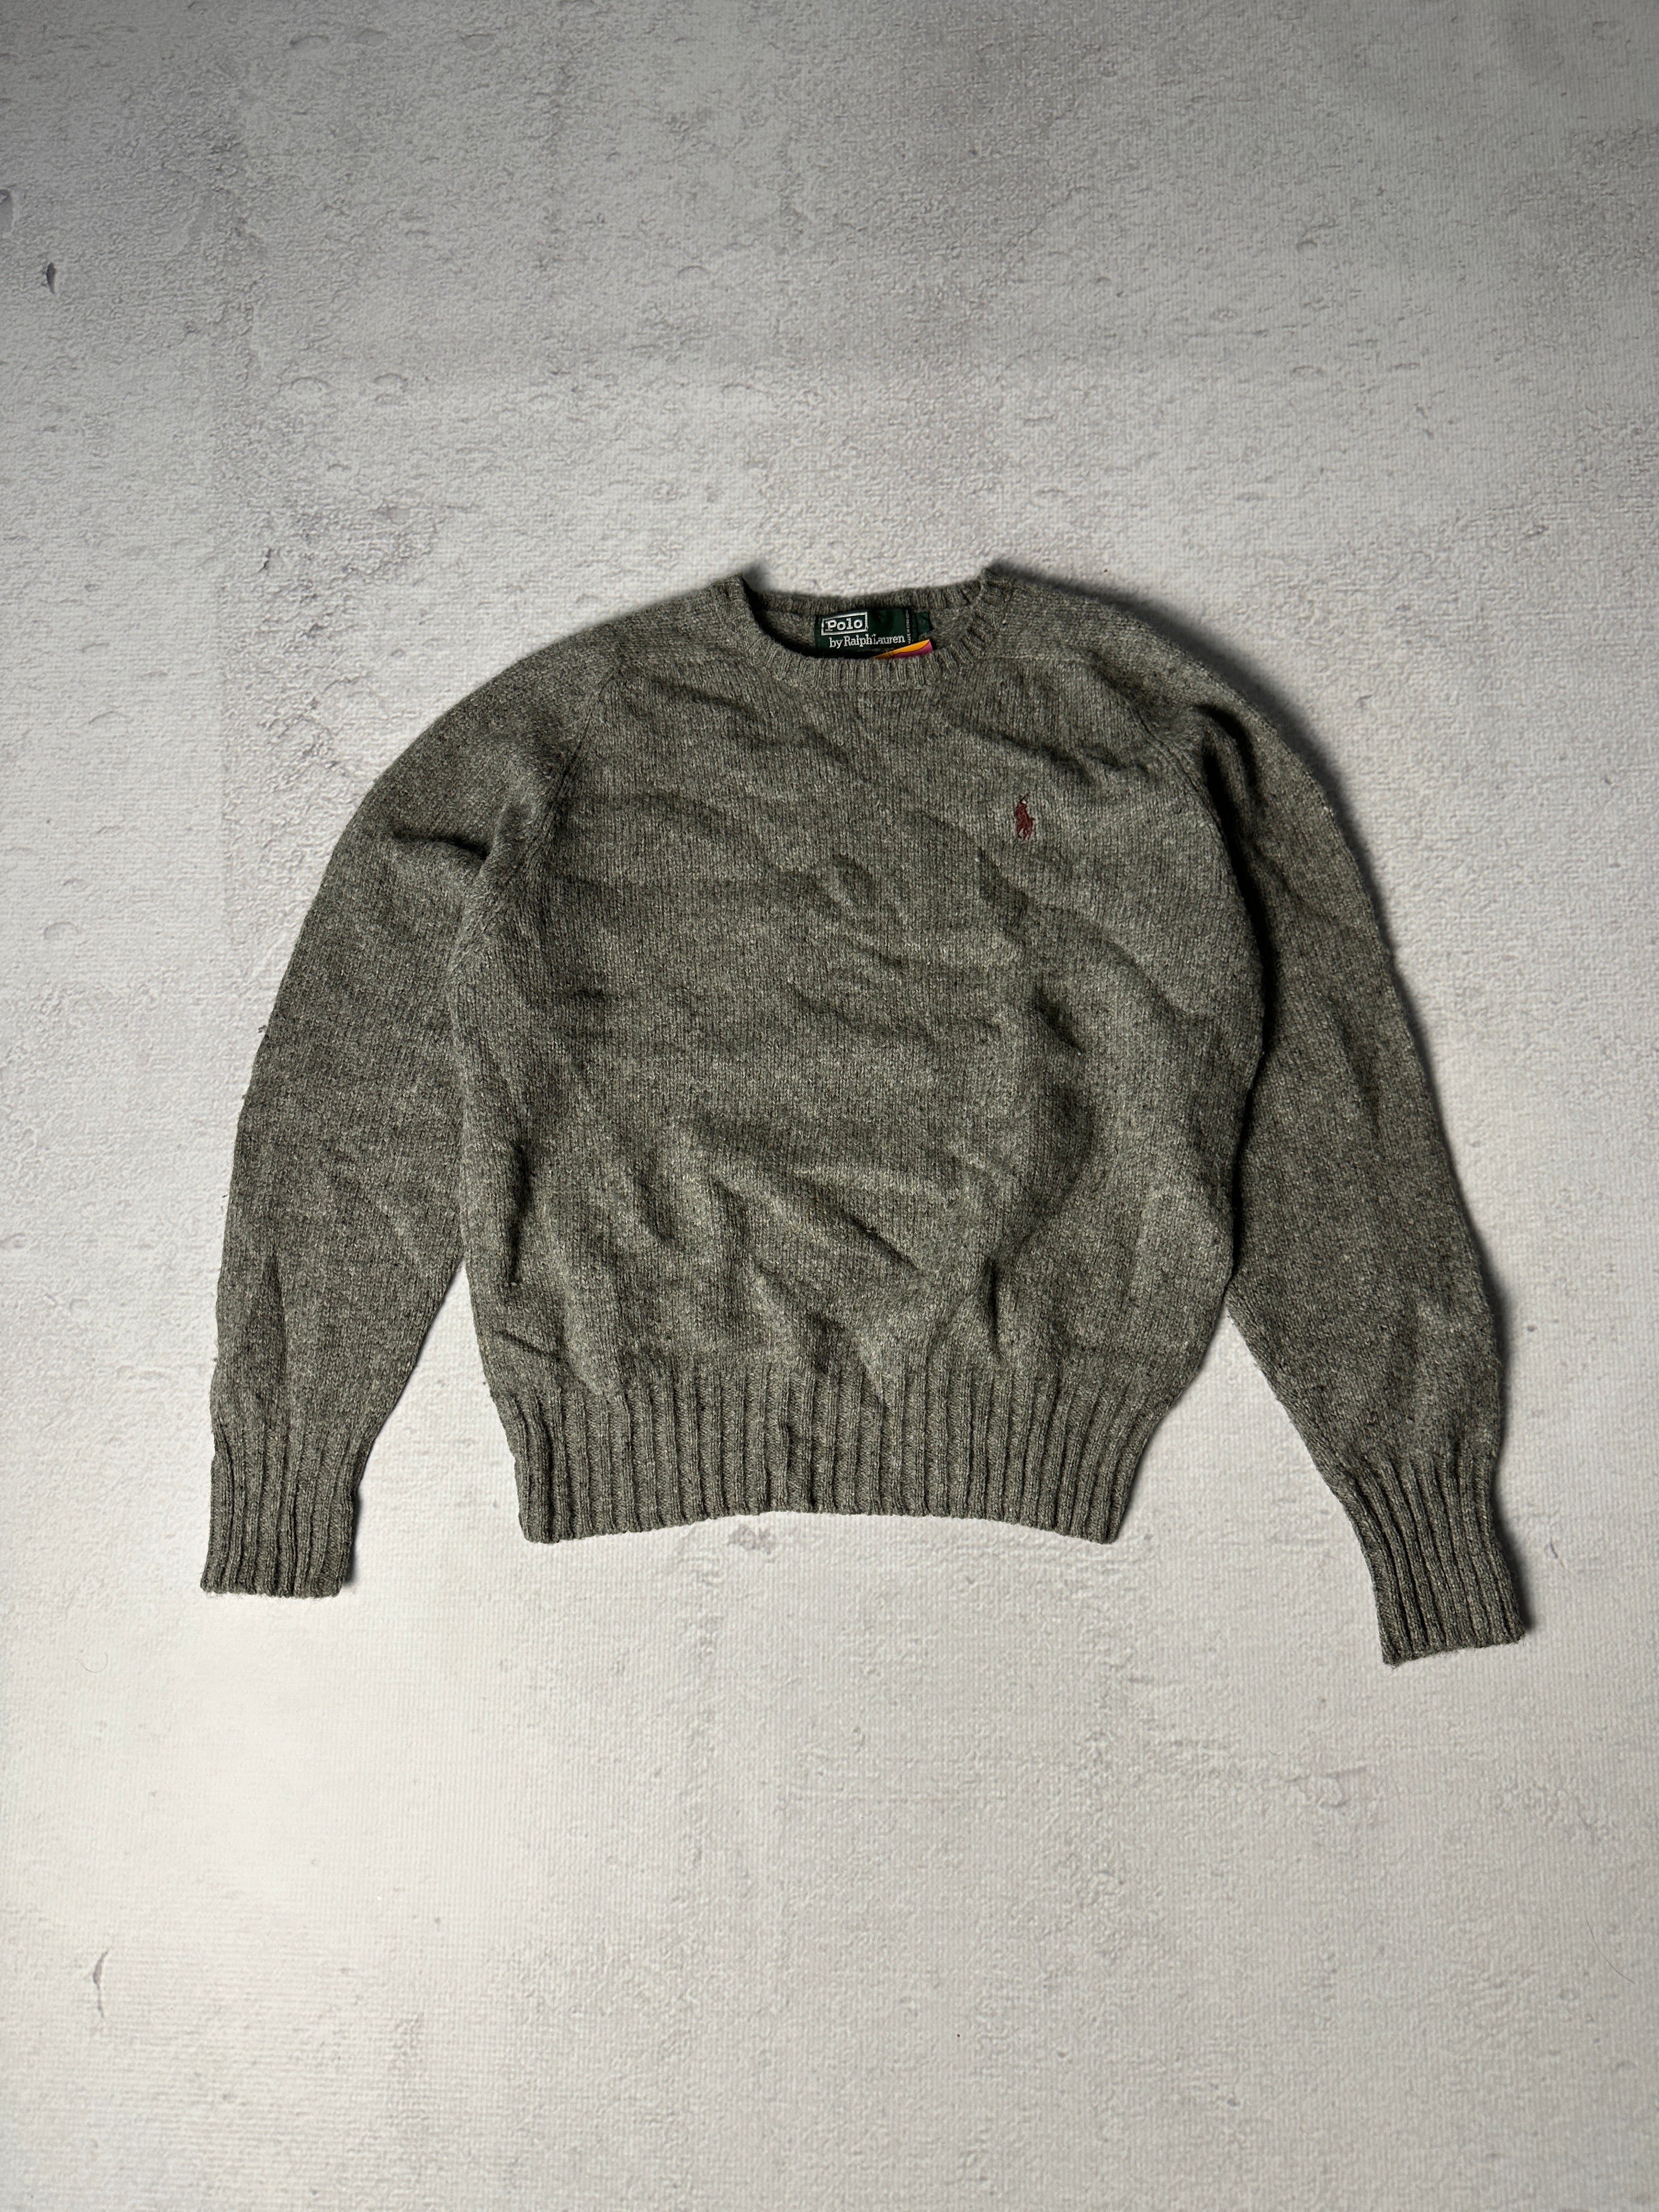 Vintage Polo Ralph Lauren Knitted Sweater - Women's Small